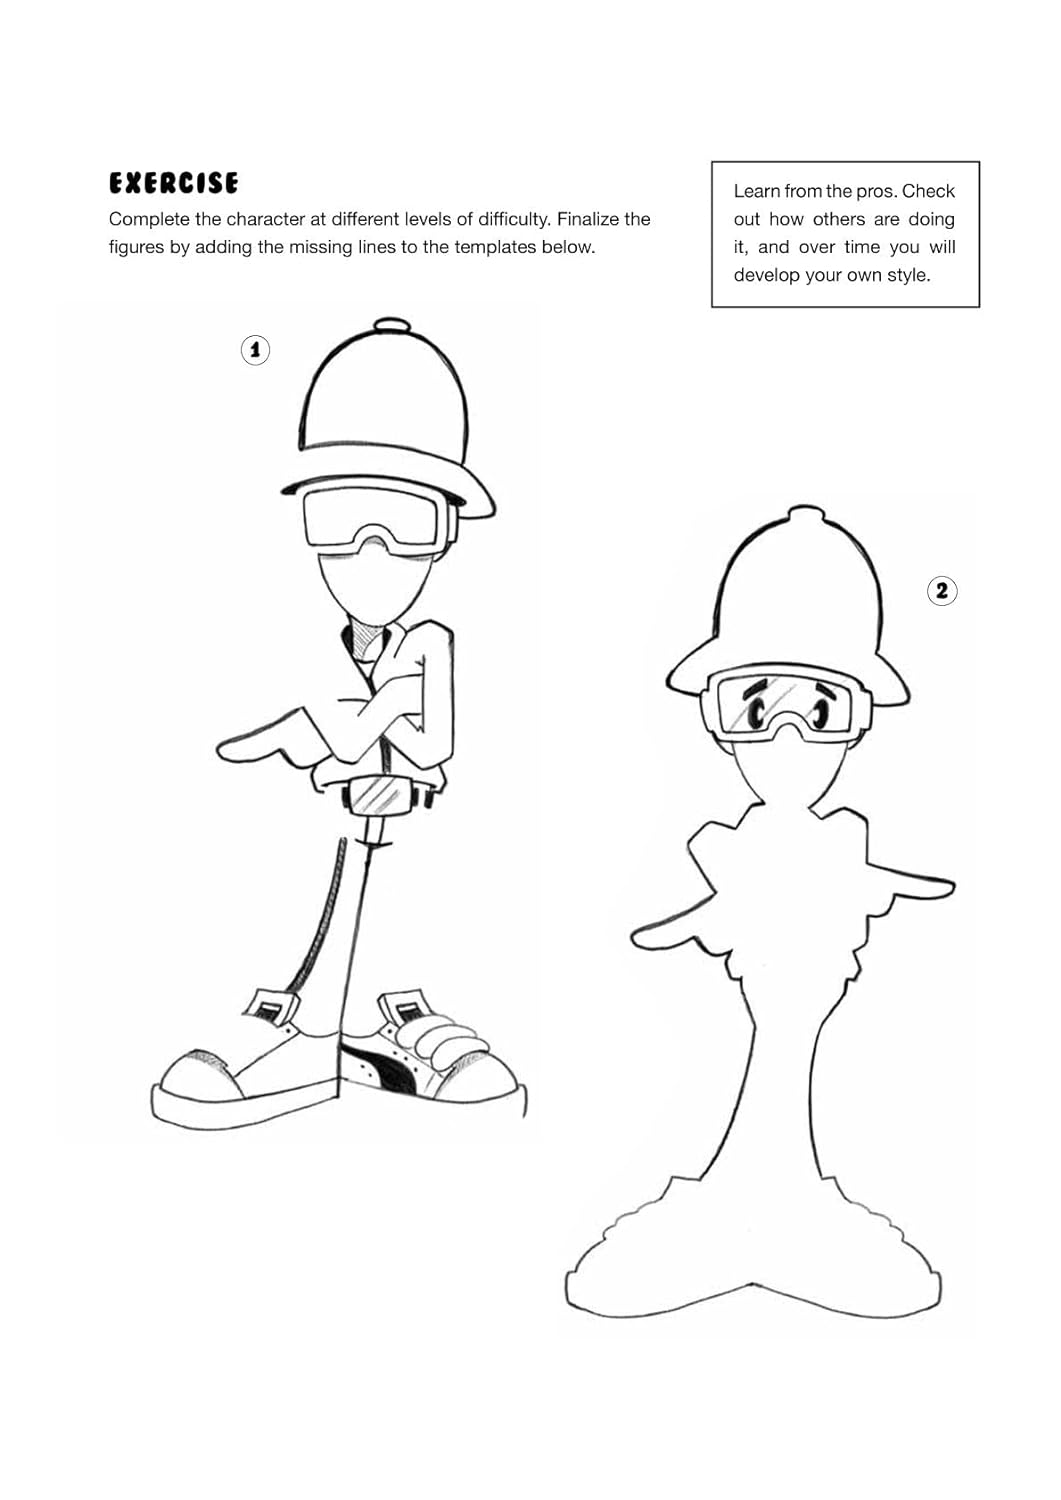 Graffiti Characters For Beginners: An Easy Introduction to Drawing Graffiti Figures